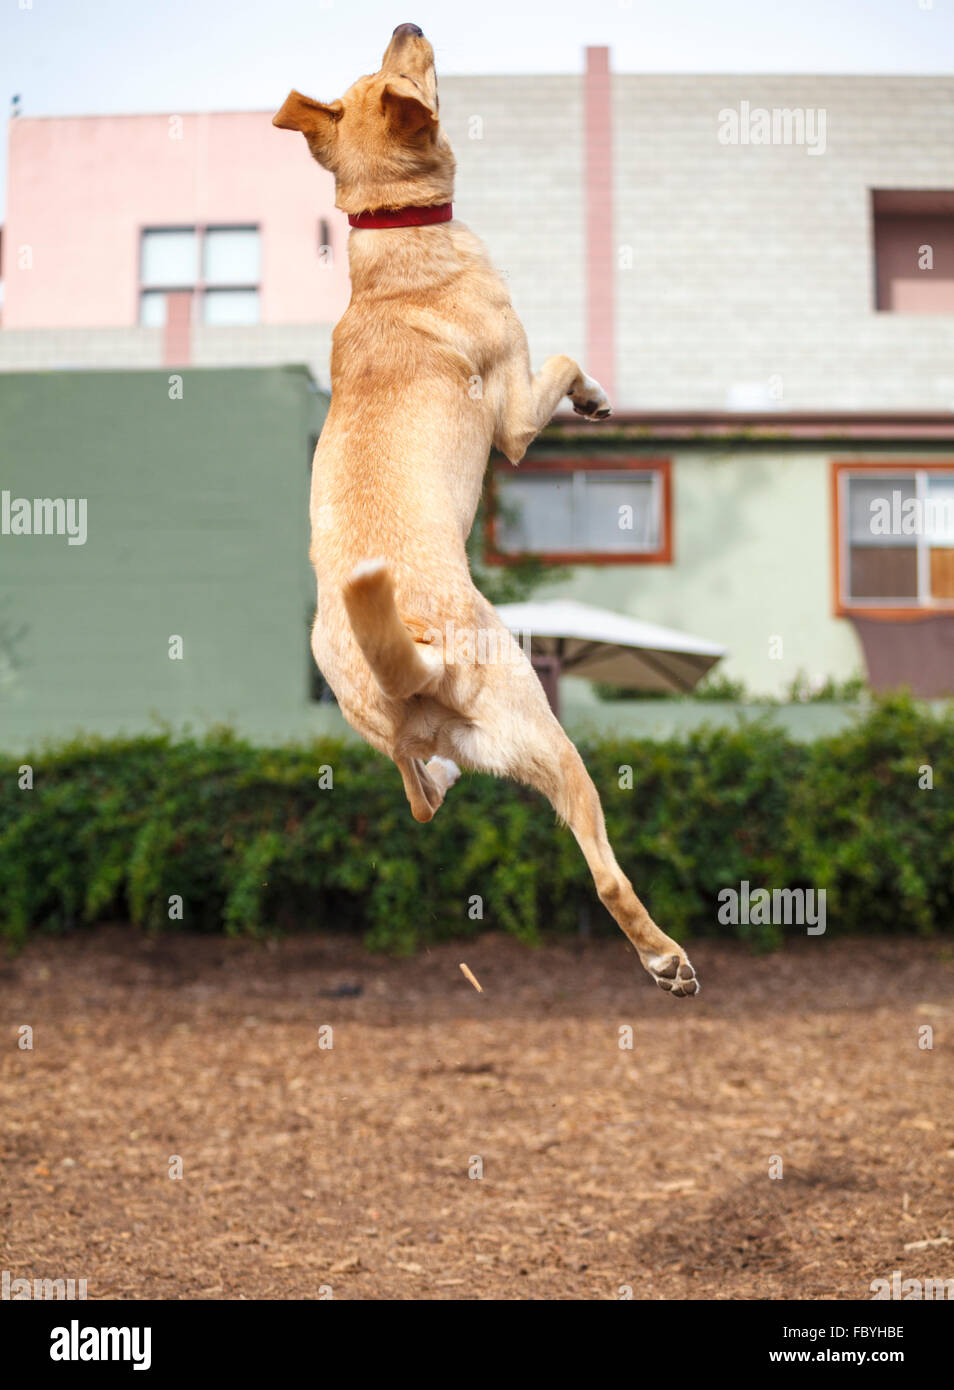 Dog jumps high in dog park Stock Photo